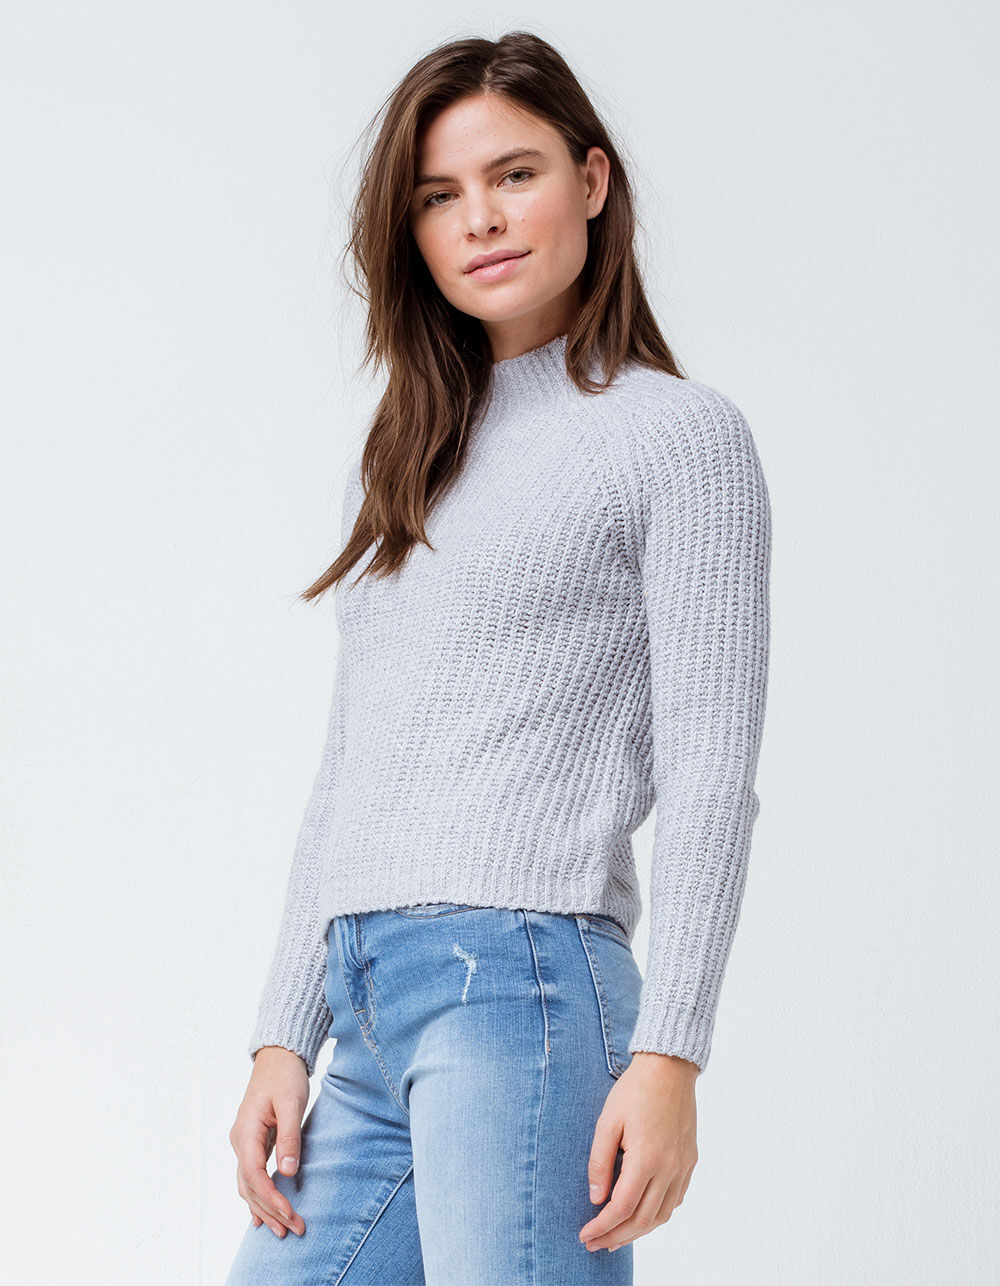 IVY & MAIN Mock Neck Solid Gray Womens Sweater - GRAY | Tillys